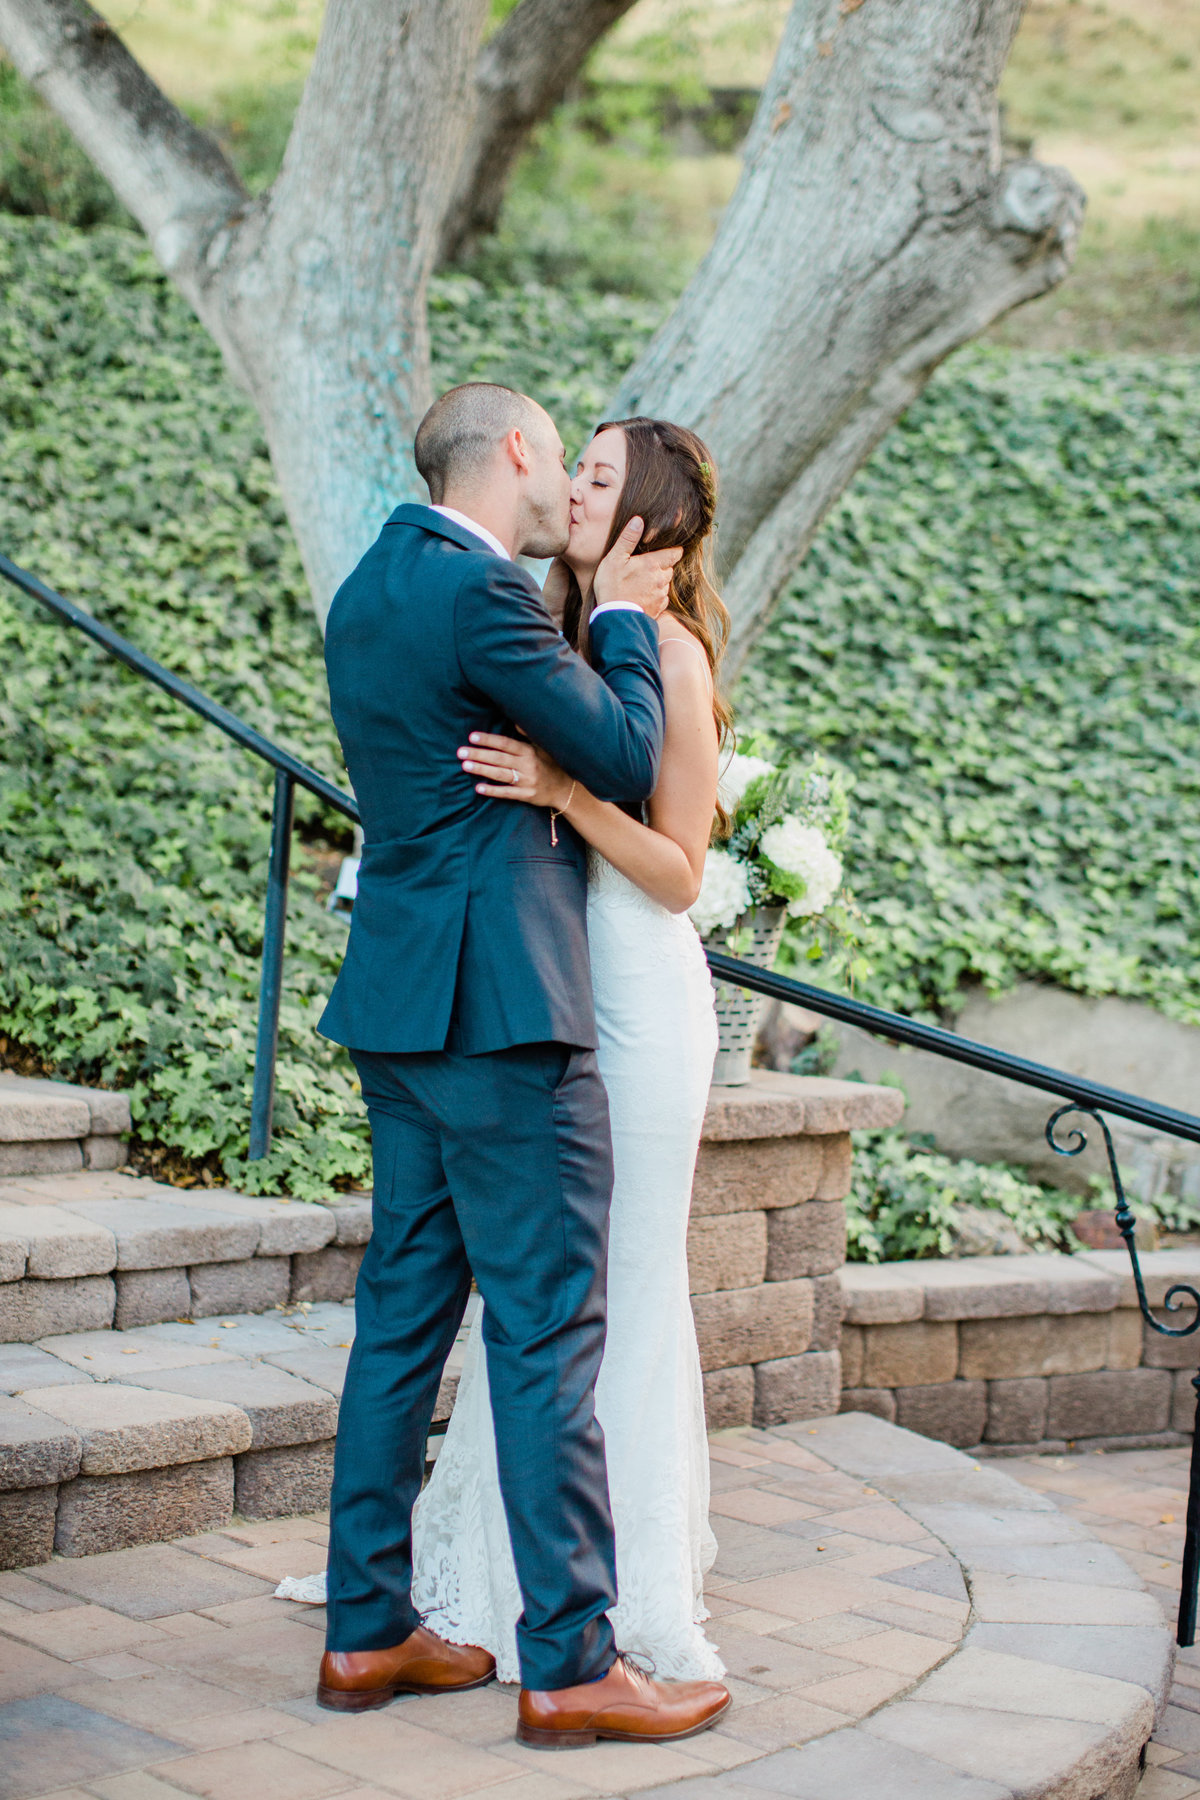 Paige & Thomas are Married| Circle Oak Ranch Wedding | Katie Schoepflin Photography725